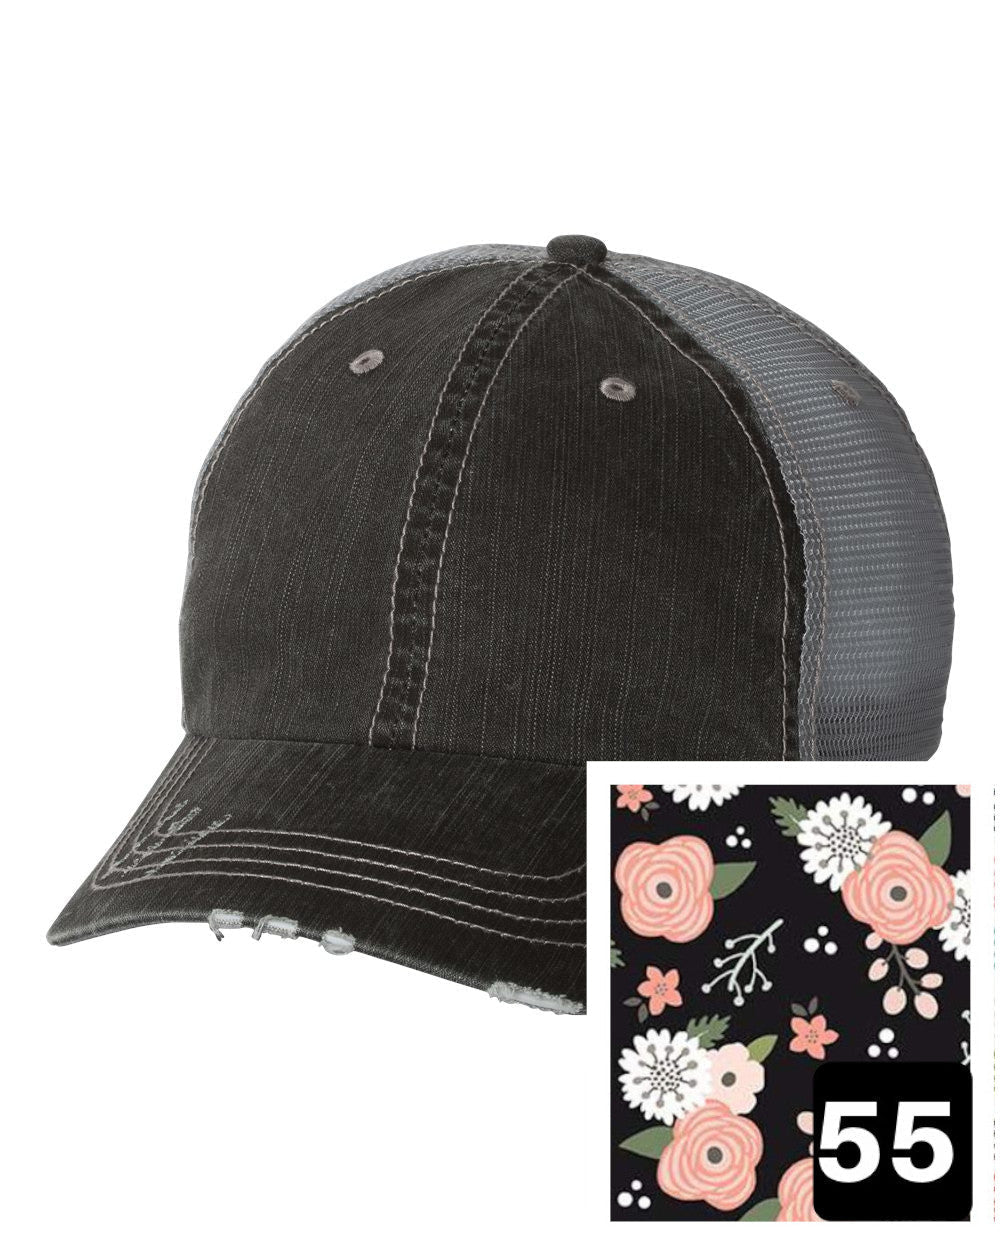 gray distressed trucker hat with petite floral on navy fabric state of Ohio